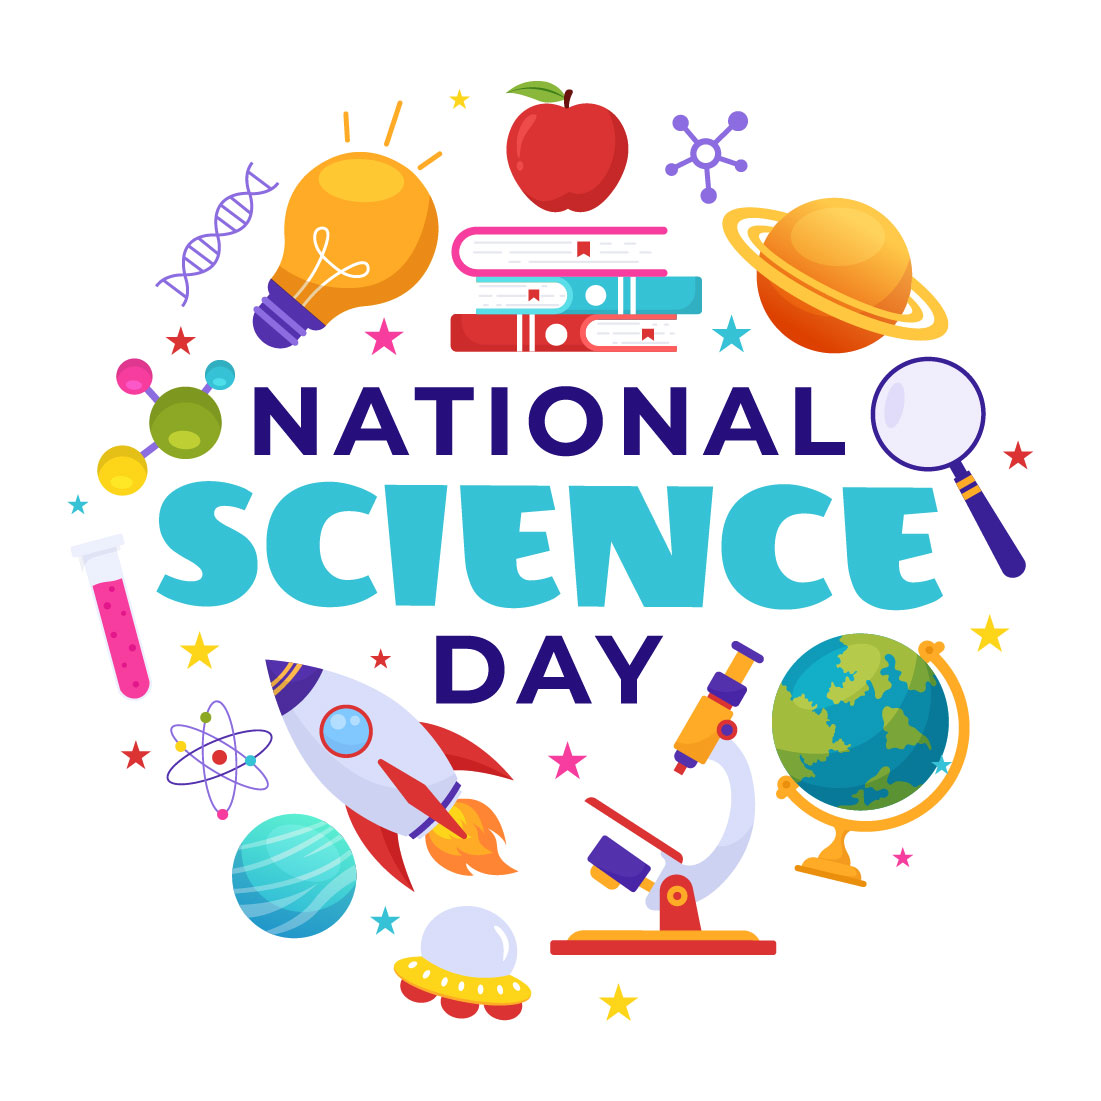 13 National Science Day Illustration preview image.